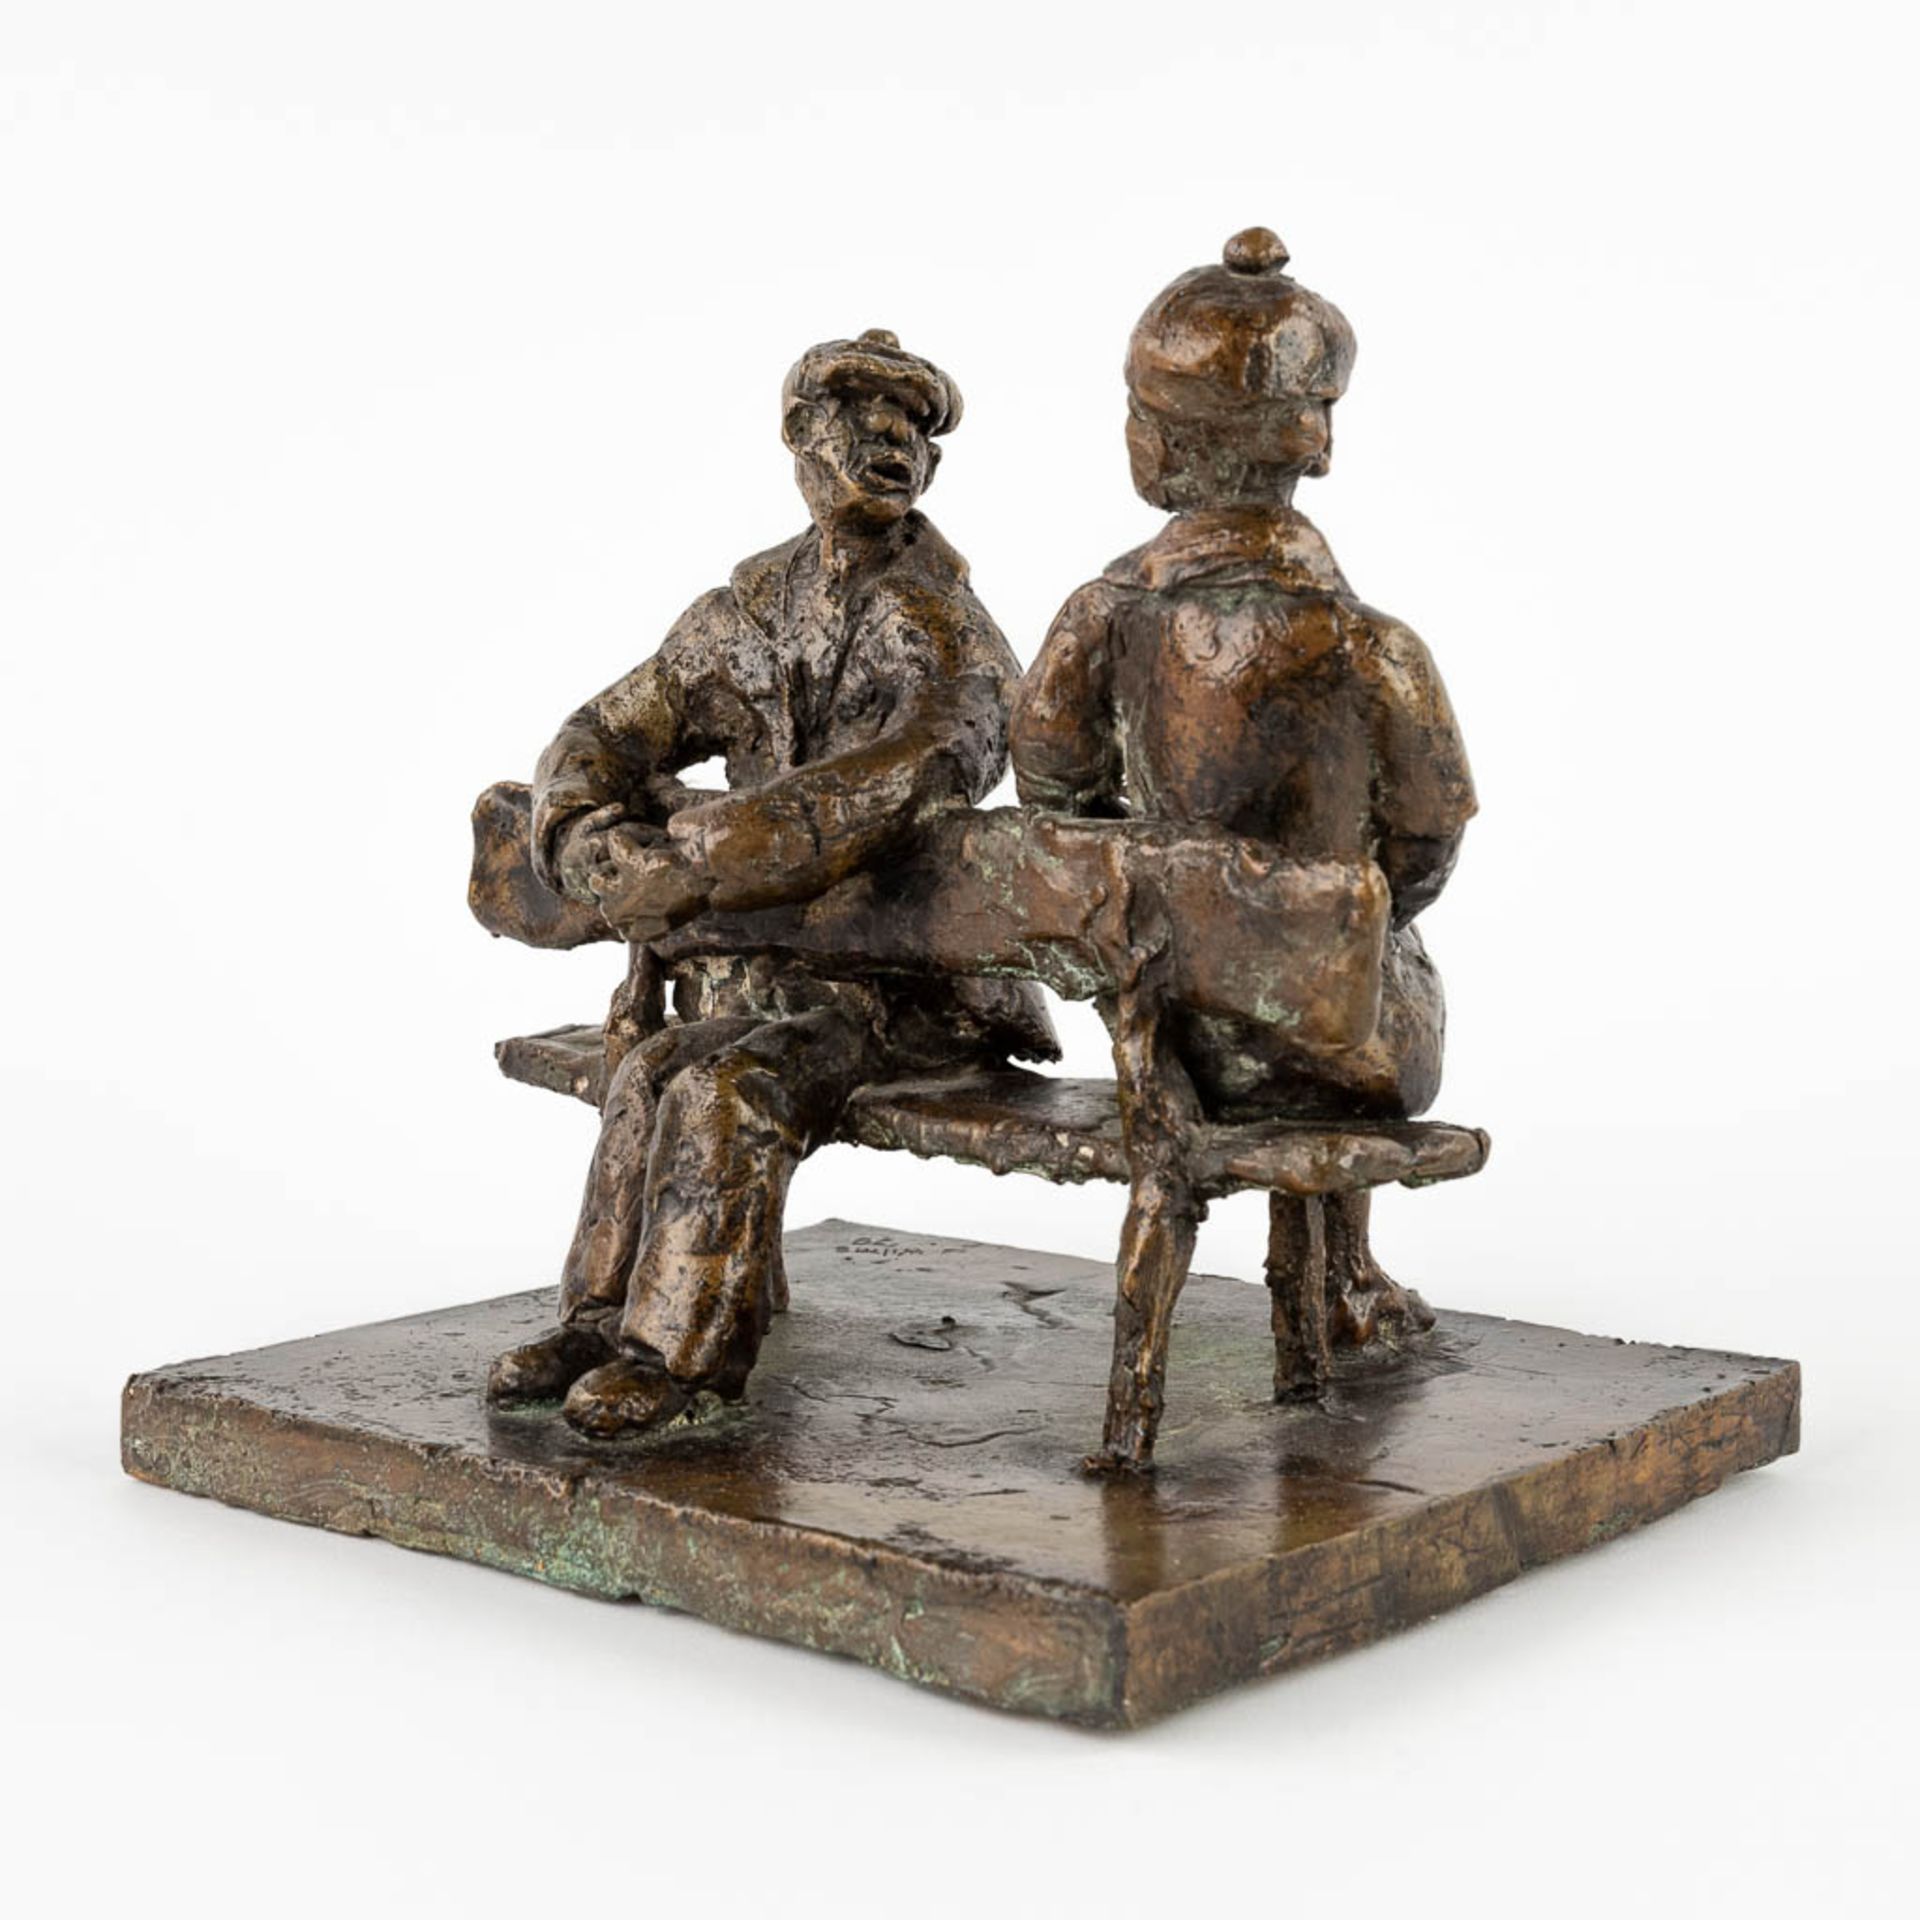 Jos WILMS (1930) 'The Bench' patinated bronze. (19)79. (D:18 x W:22 x H:20 cm) - Image 6 of 14